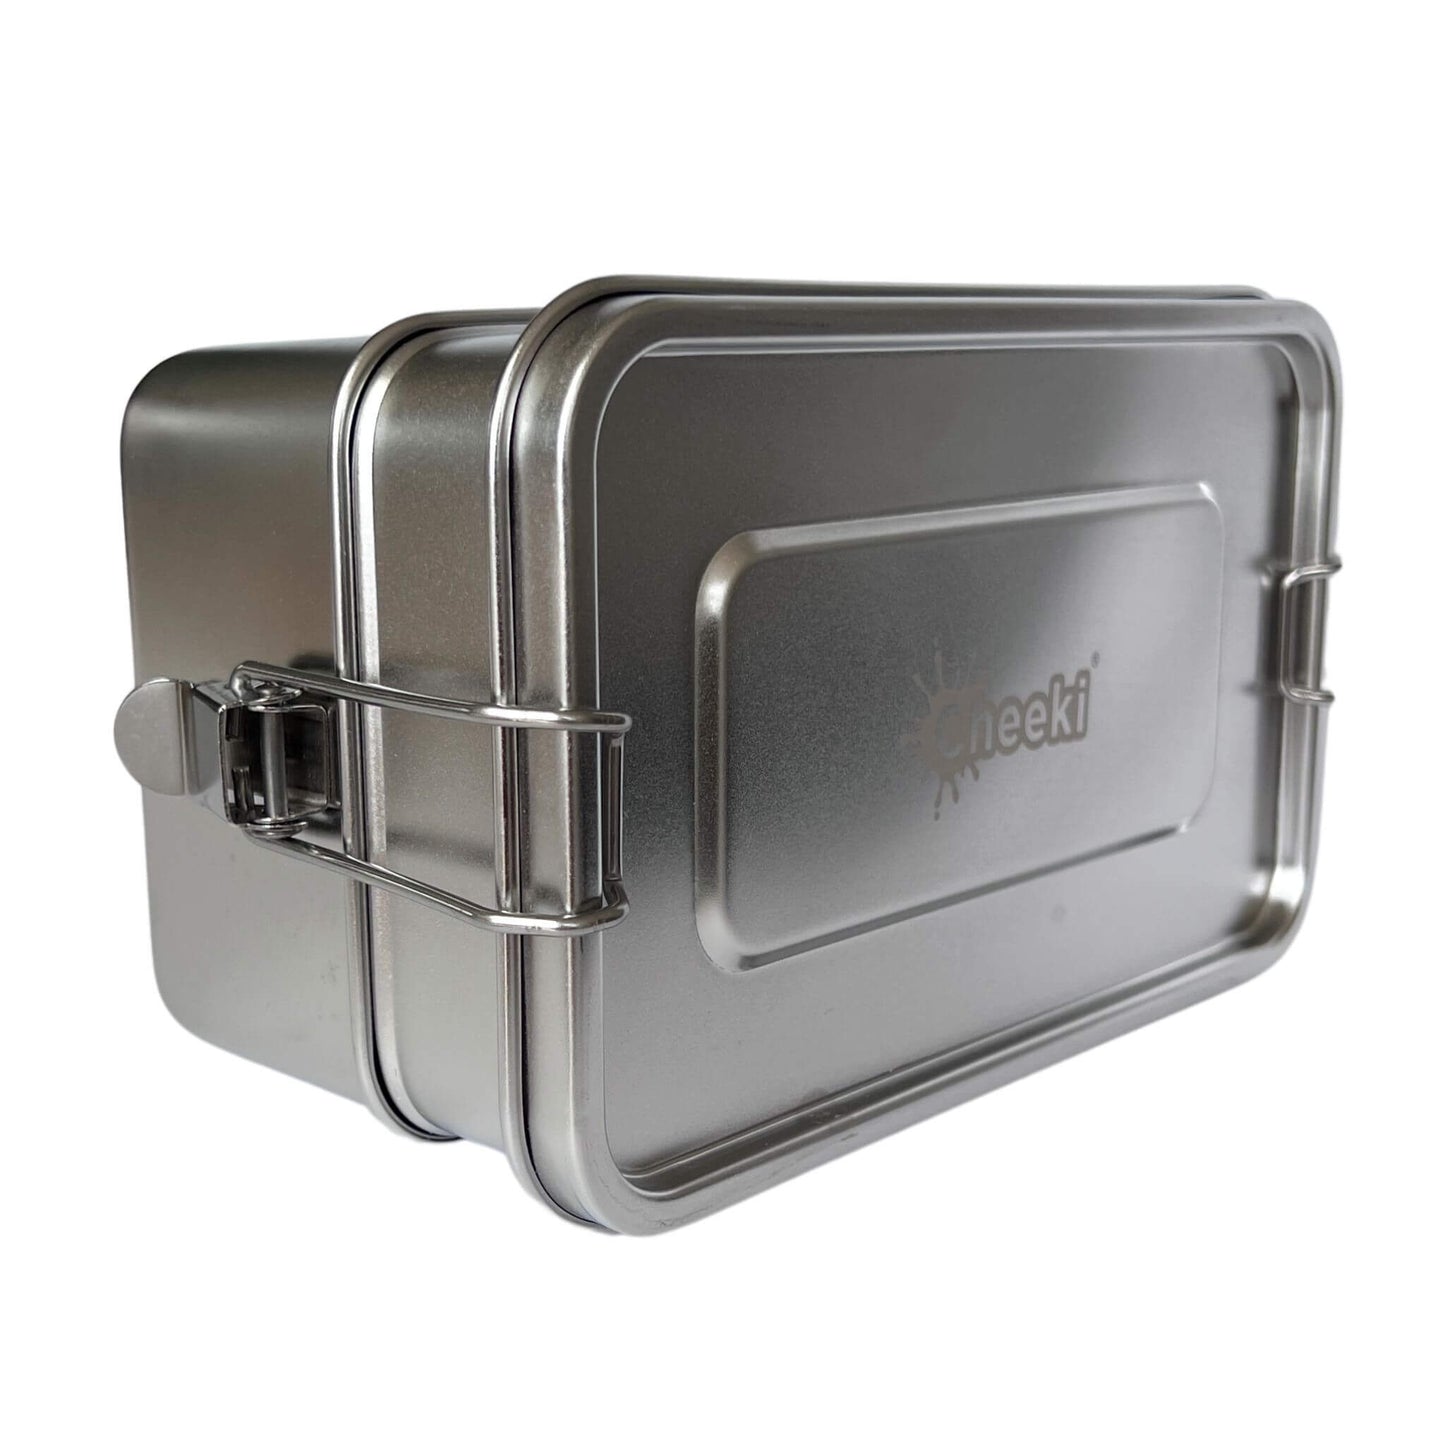 cheeki double stack stainless steel lunchbox on its side